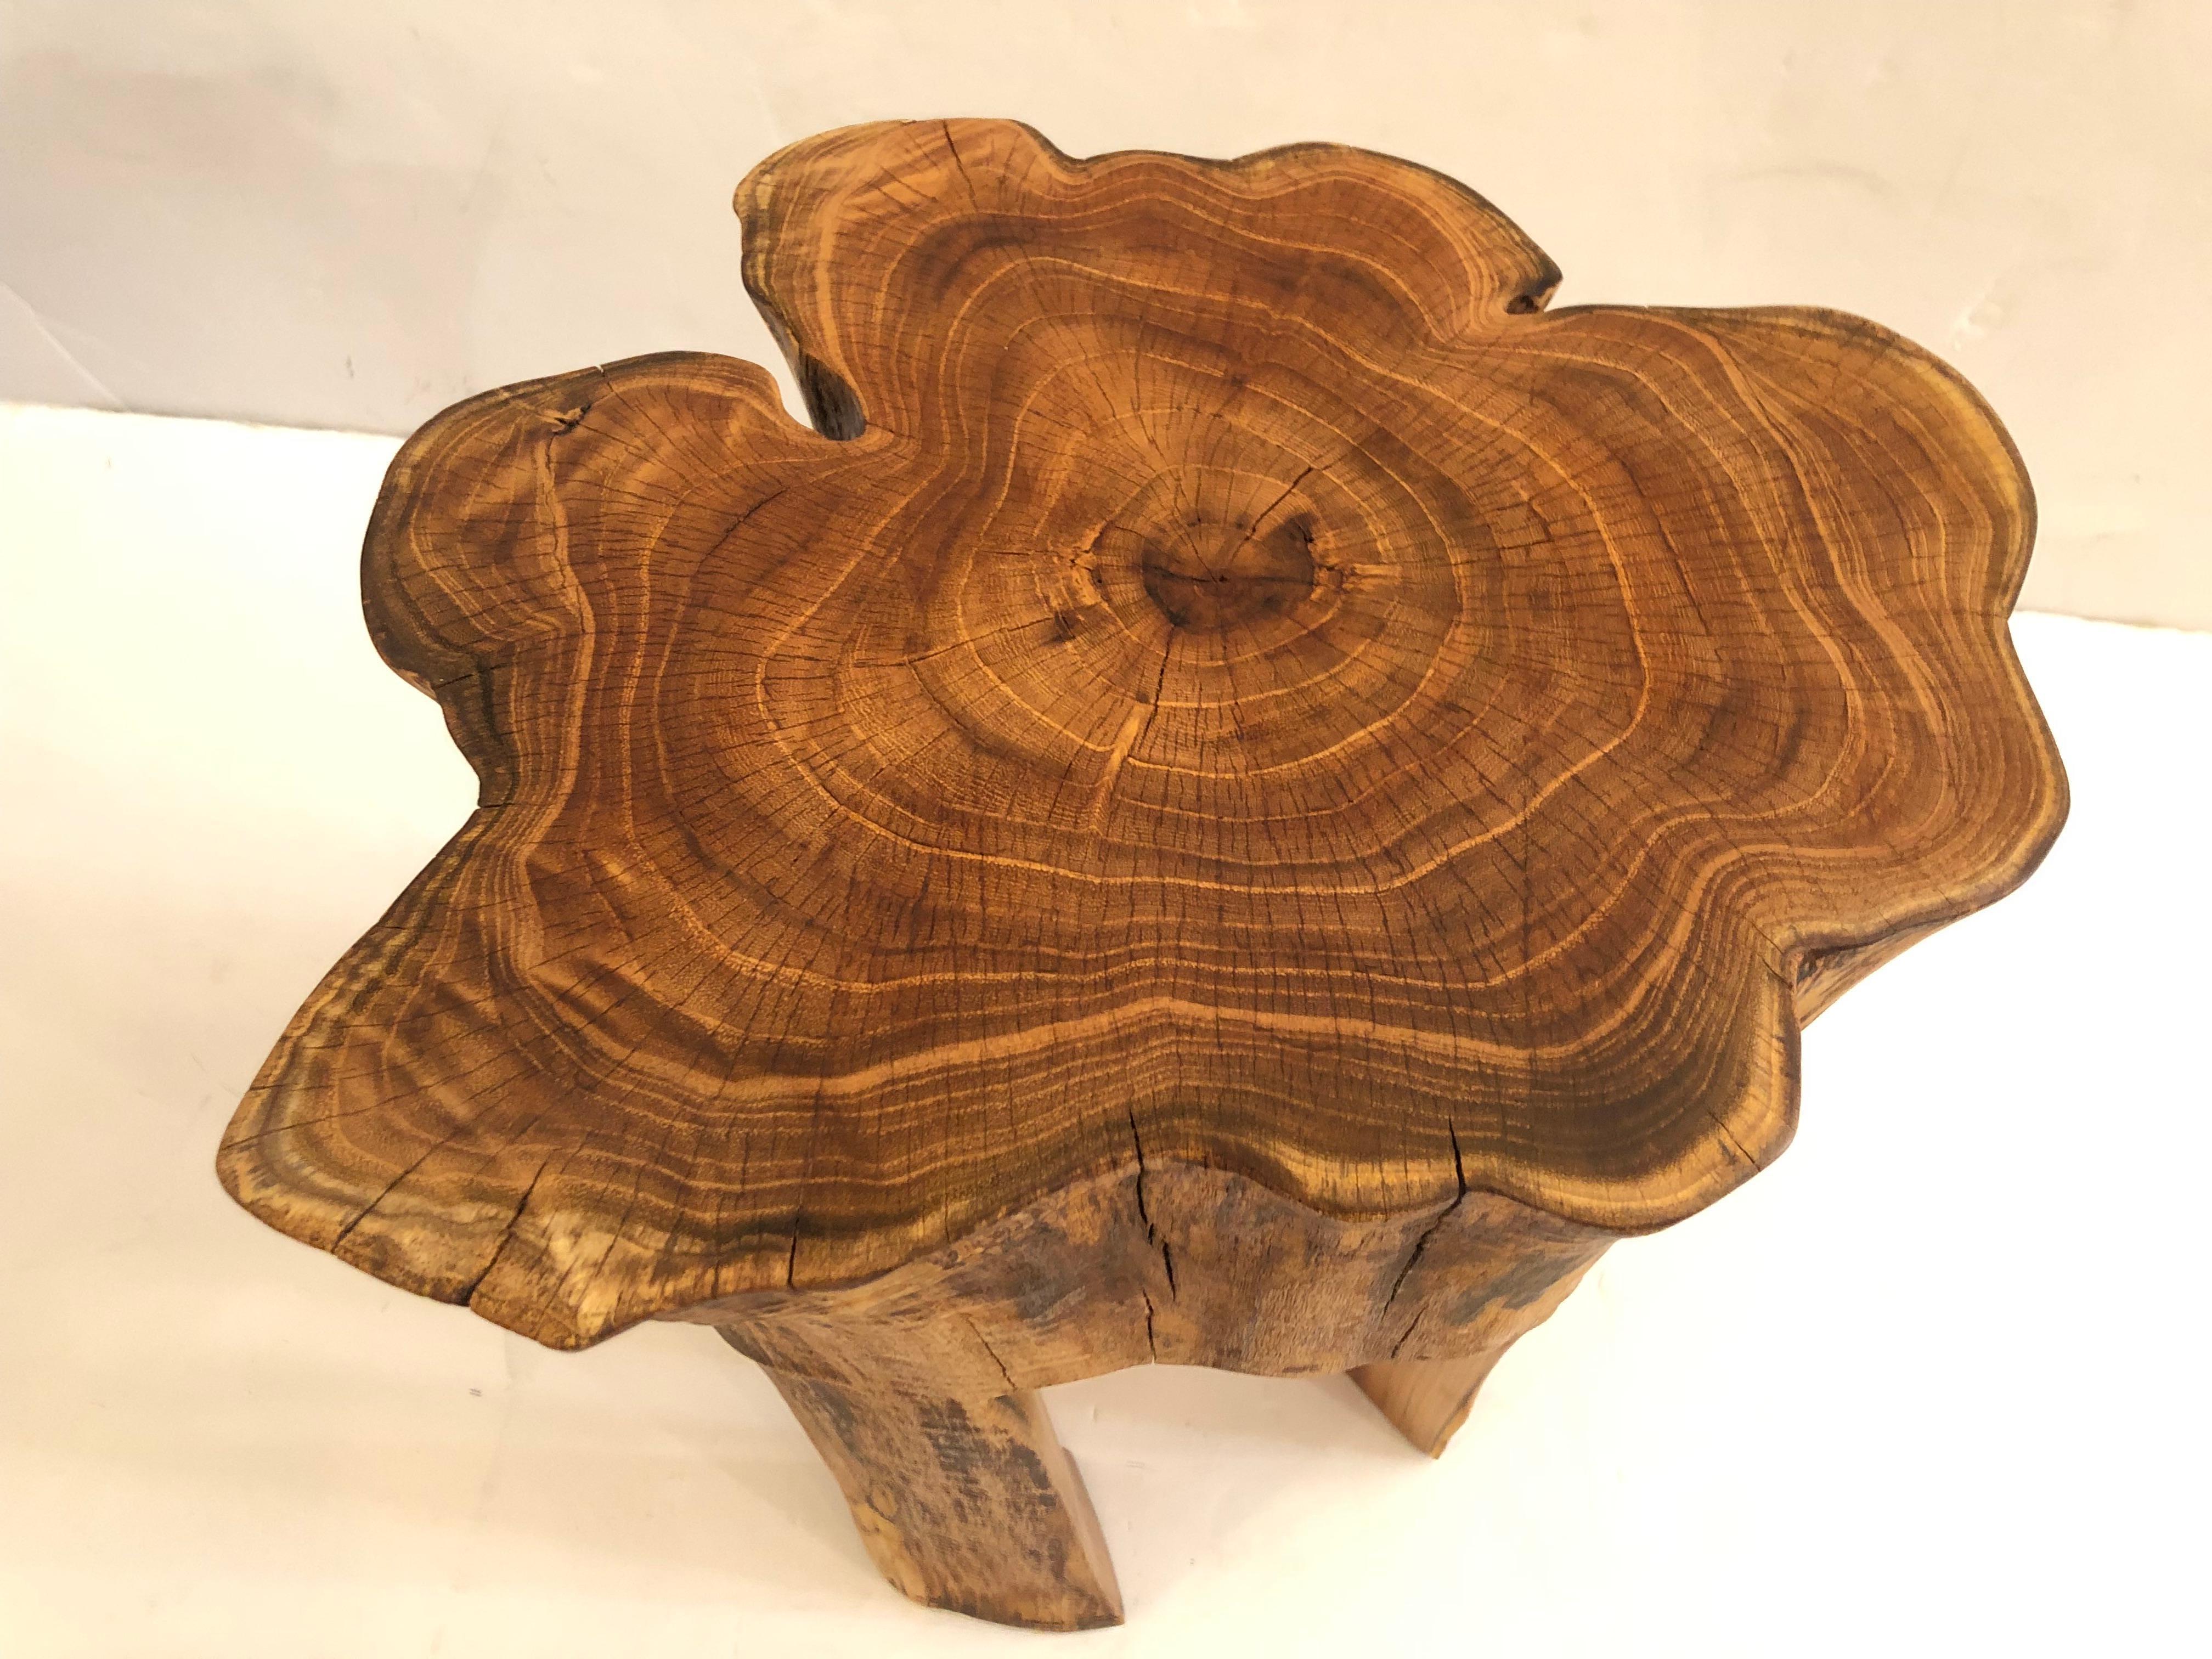 One of a kind artisan hand crafted organic modern small drinks table created from a honey locust tree having free form amoeba shaped top, gorgeous grain and earthy sculptural legs. Painstakingly designed and sanded to a fine finish by NJ artist John